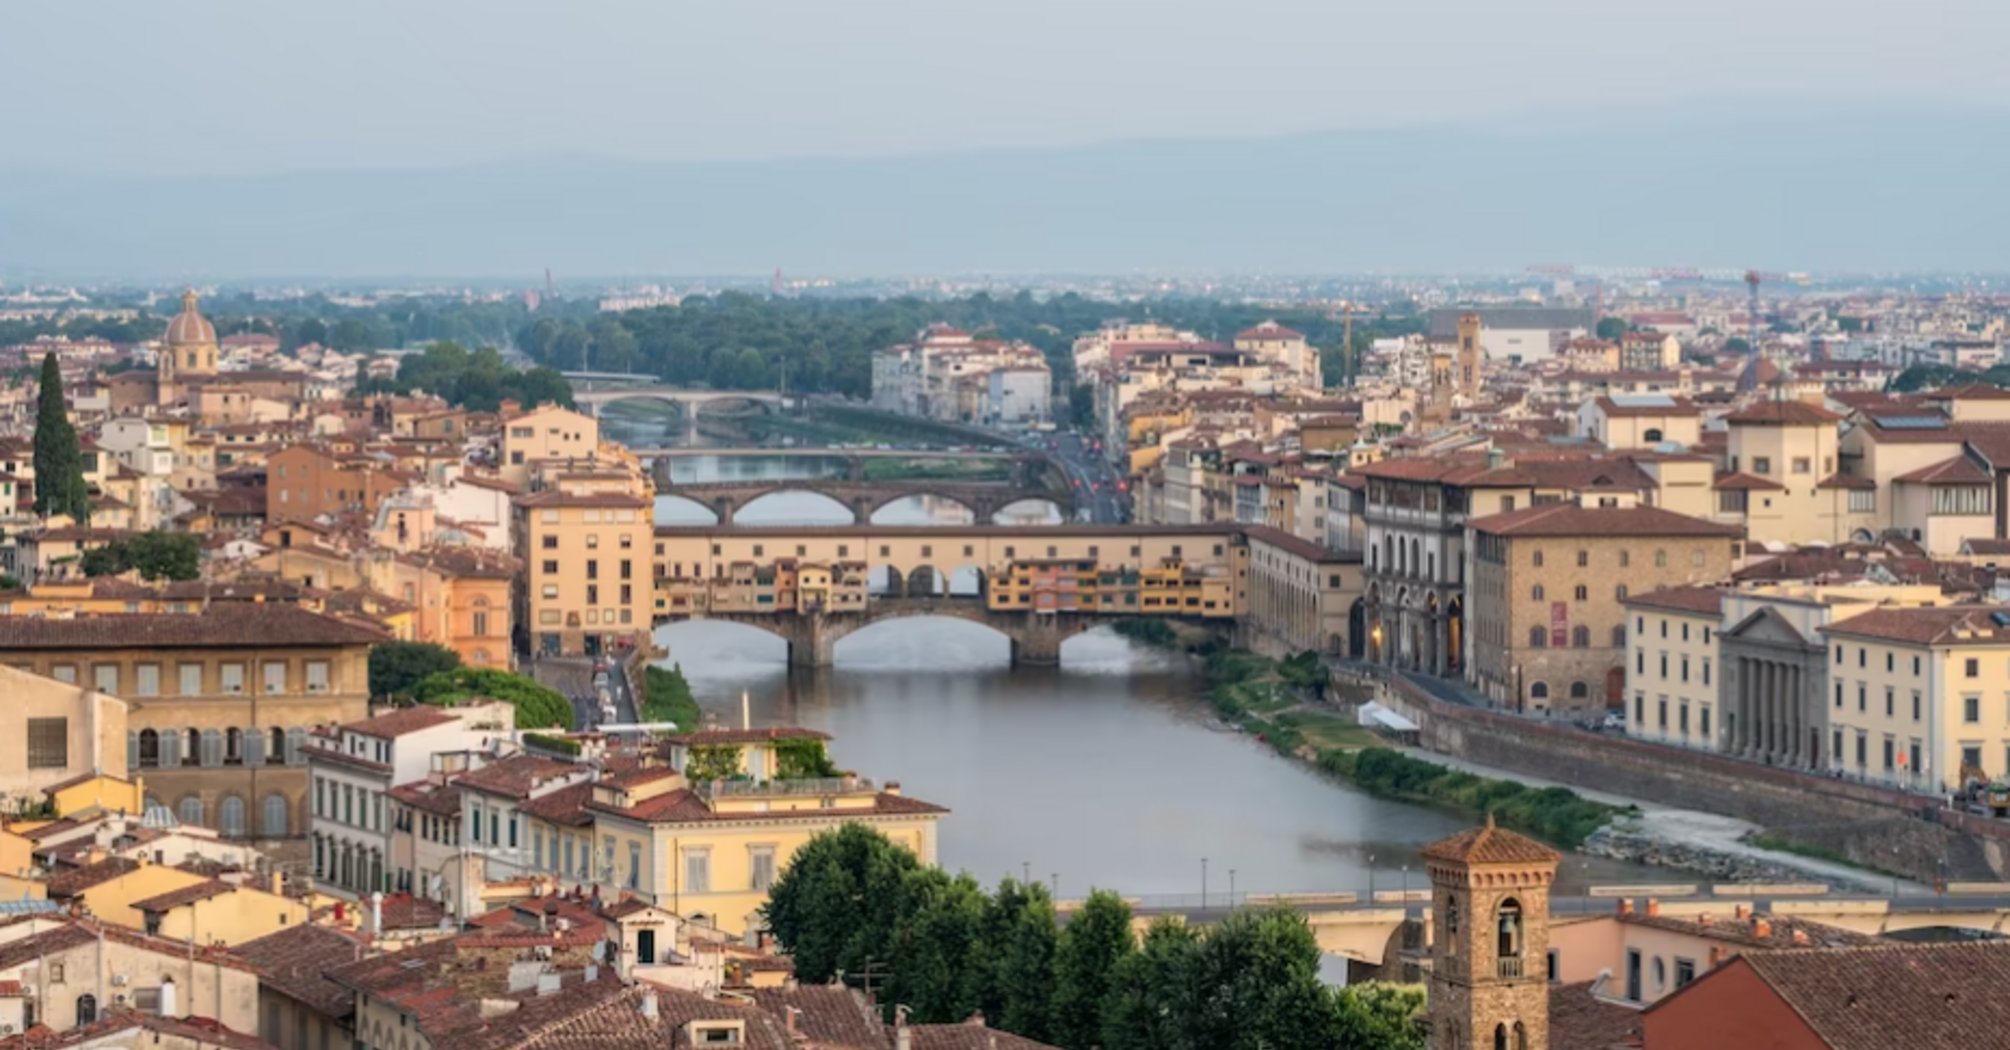 Florence has restricted rental housing for tourists